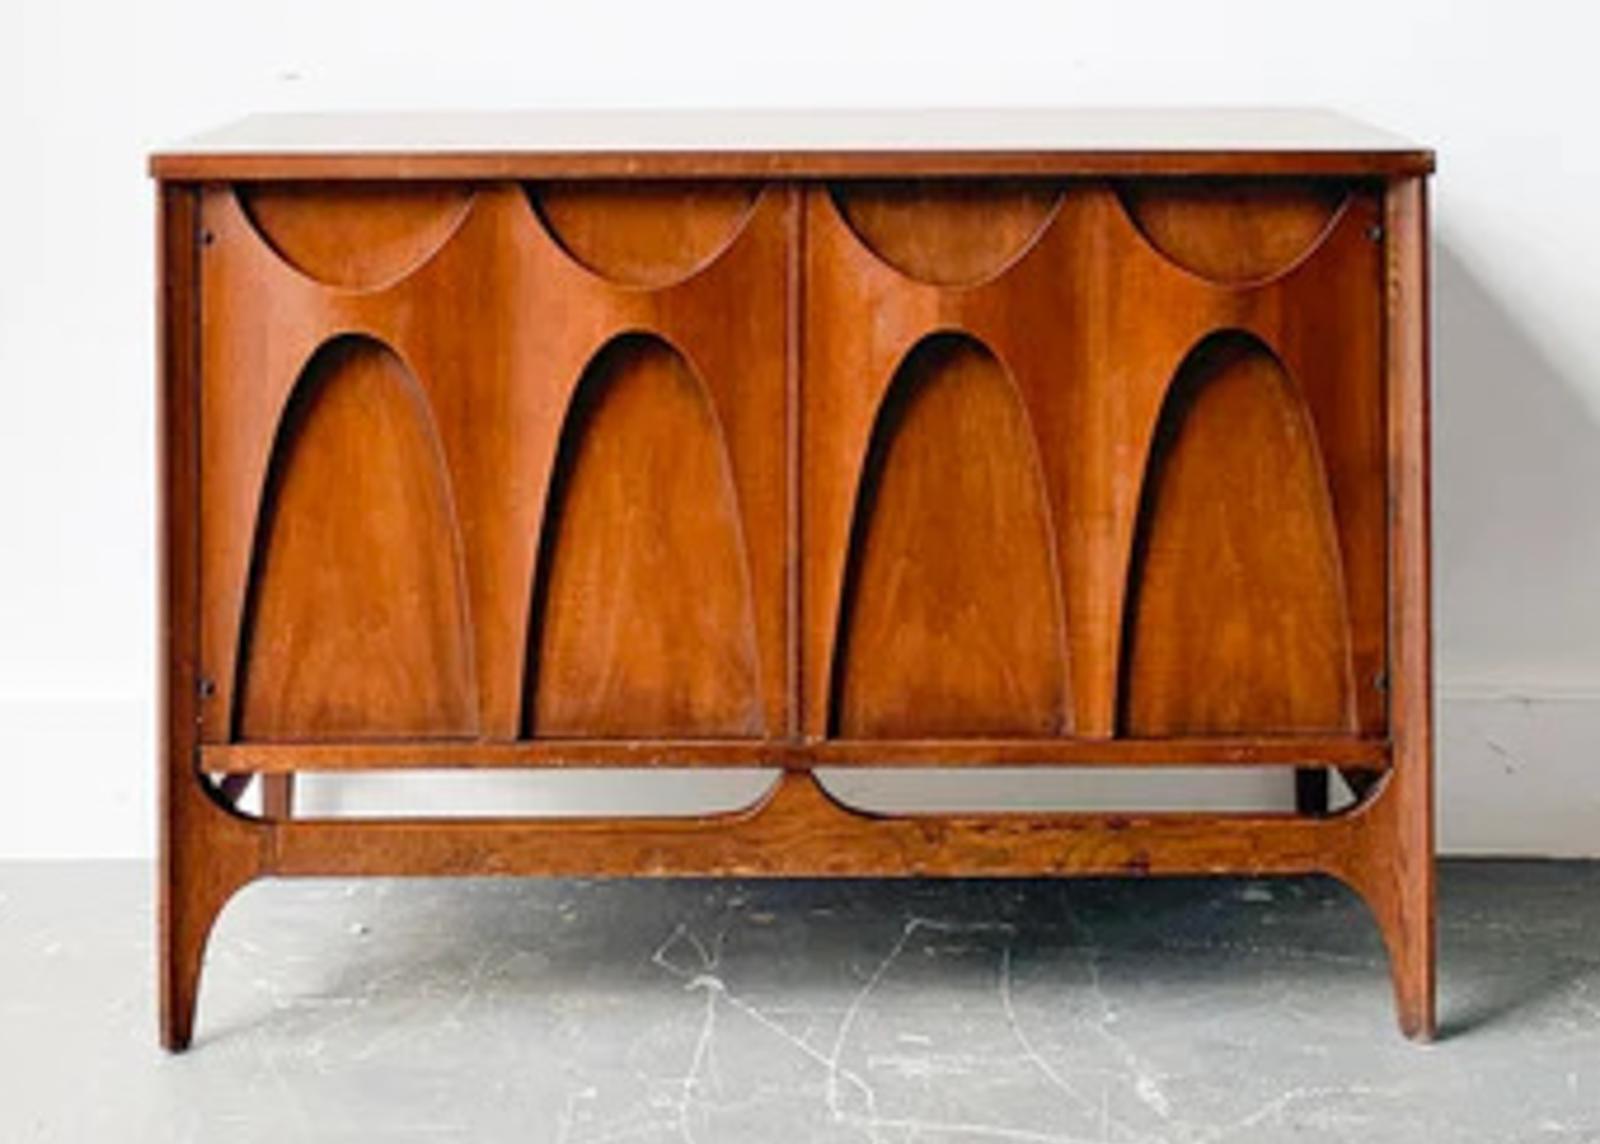 This fantastic buffet or media cabinet was built in the 1970s by high-end manufacturer Broyhill for their Brasilia line of furntiure. Since then, the Brasilia line has become more desirable, and original sets are difficult to come by. Featuring